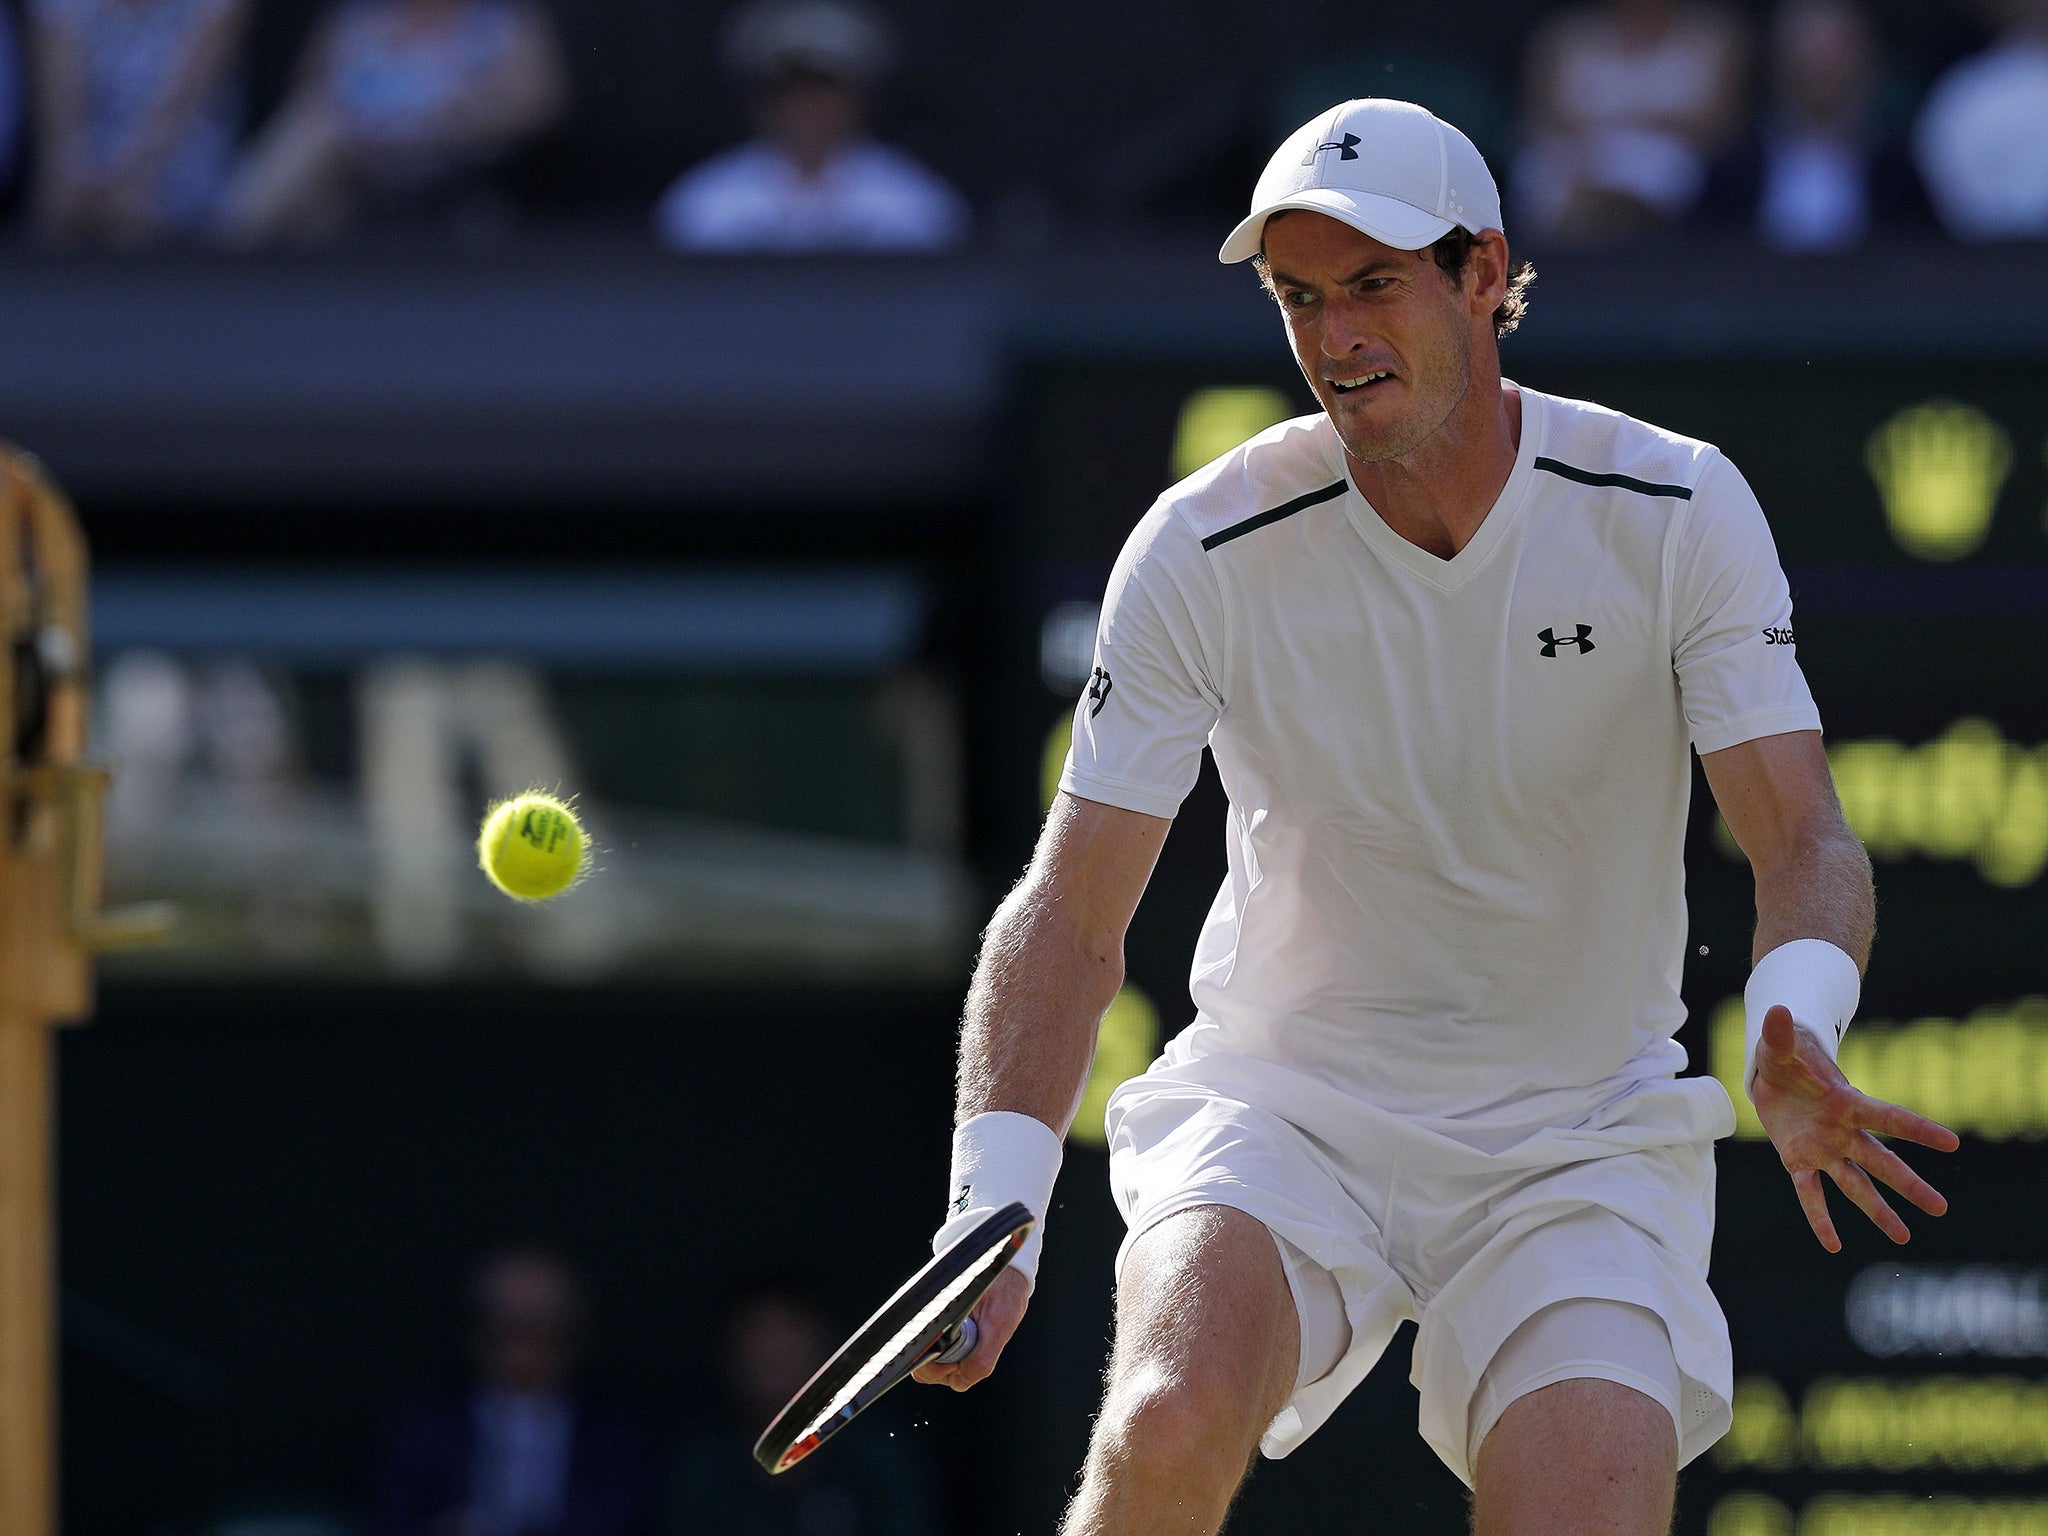 Andy Murray vs Fabio Fognini live Latest score and updates from Wimbledon third round match on Centre Court The Independent The Independent